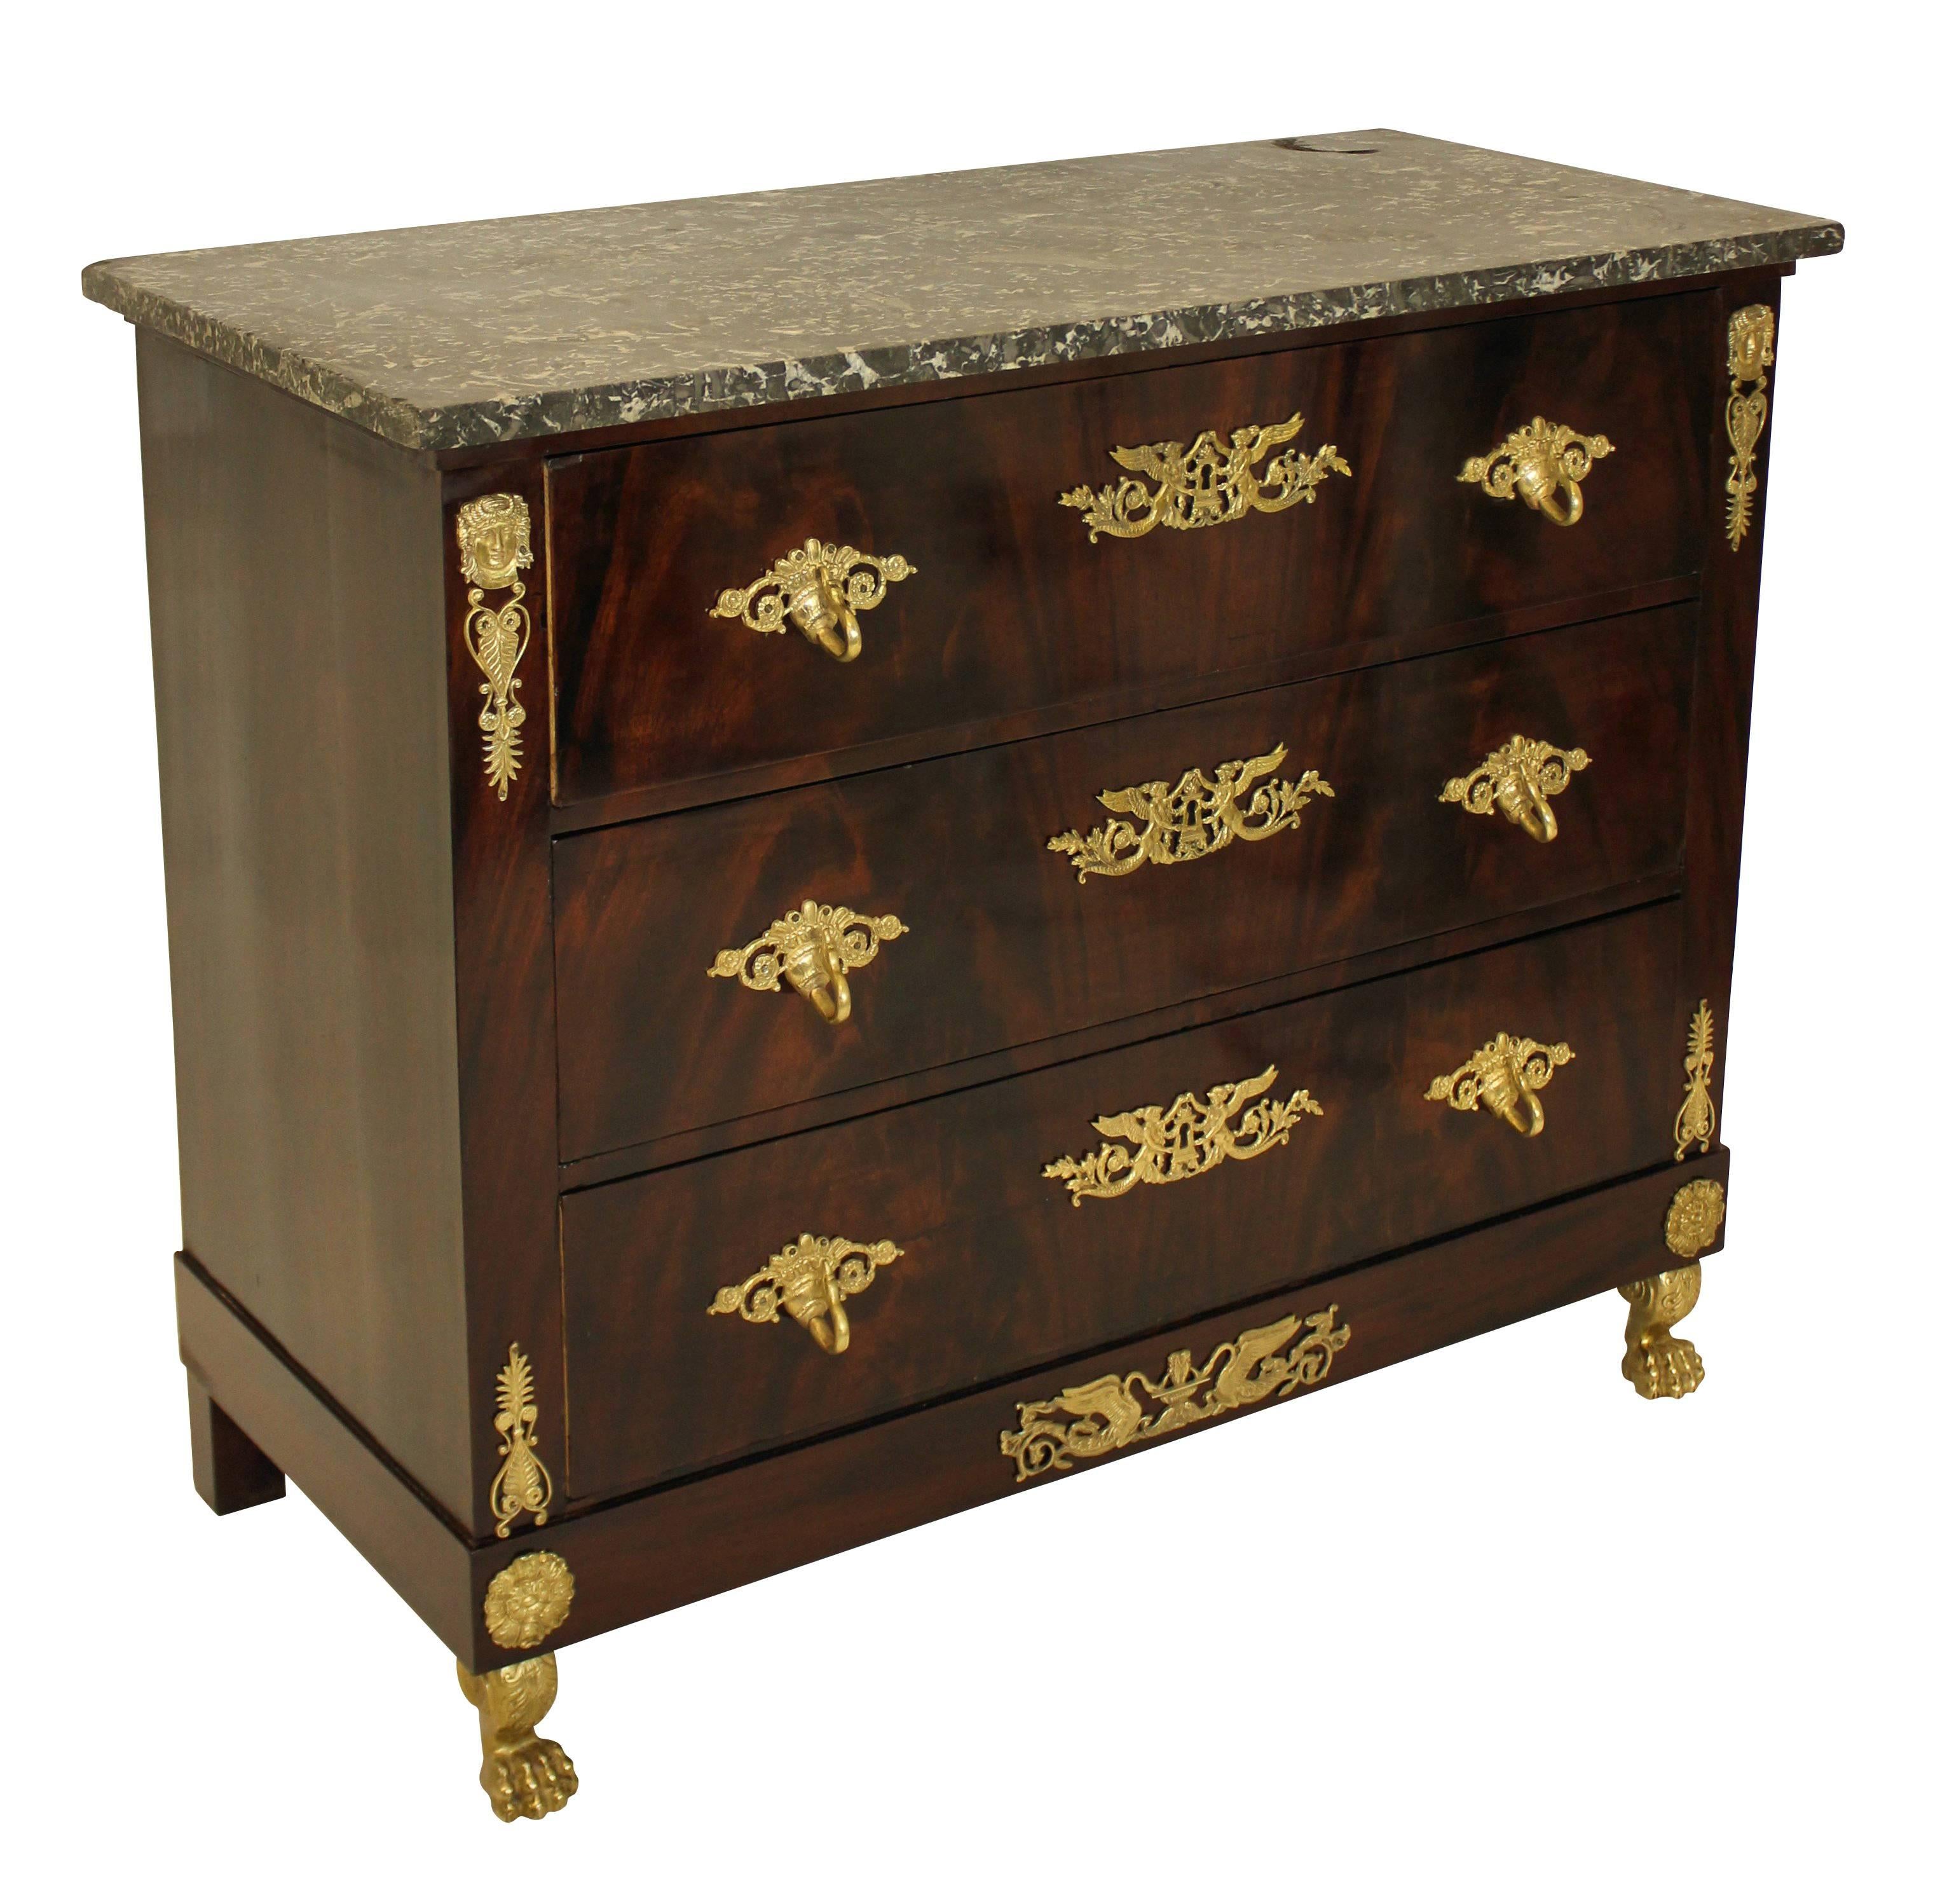 A French, First Empire commode of good quality. In flame mahogany, comprising four drawers, profusely decorated with gilt bronze mounts with detailed gilt bronze lion paw feet and a Belgian fossil marble-top.